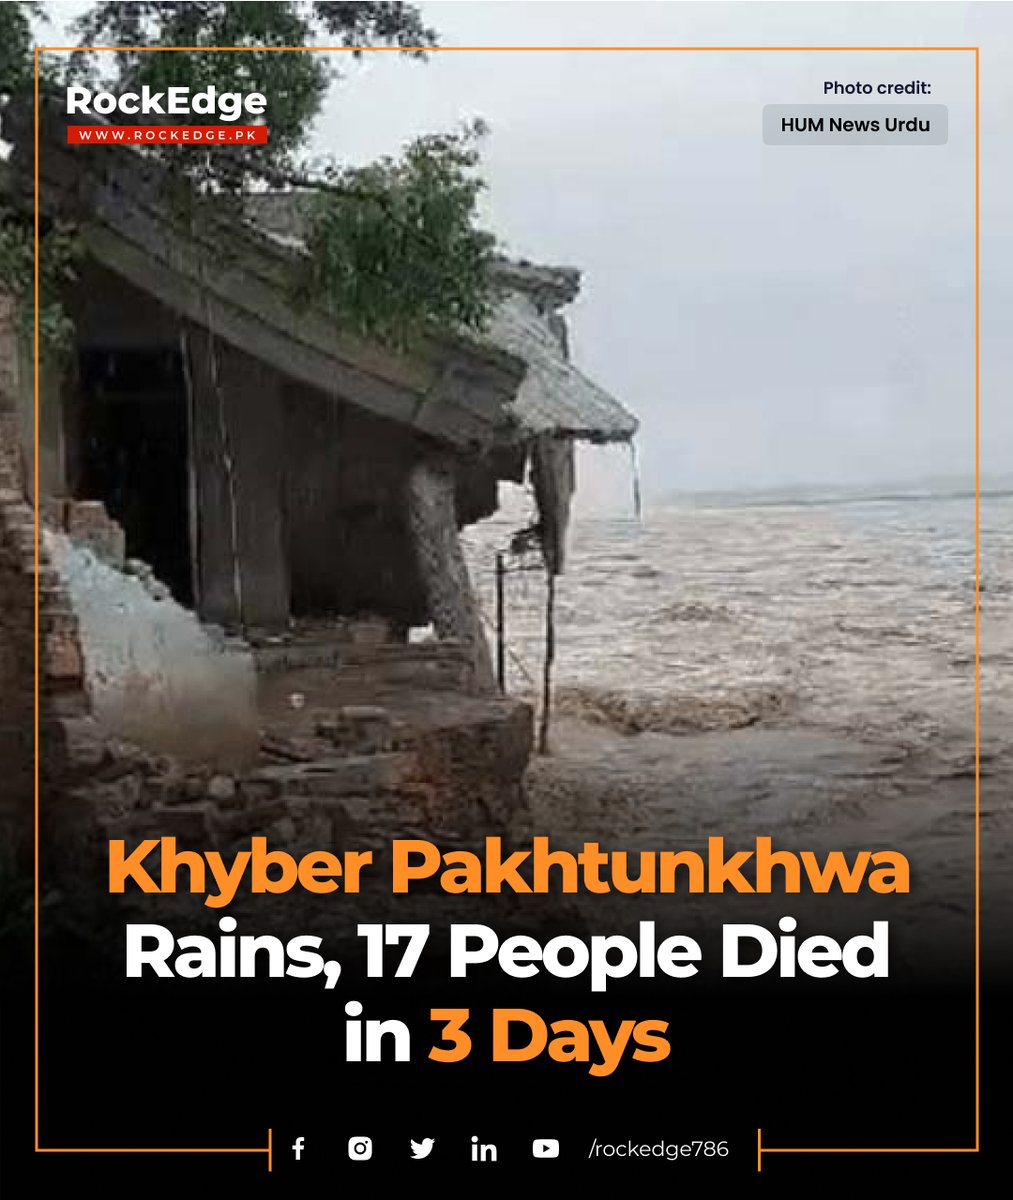 PDMA issued a report of financial loss due to rain in 3 days according to which 116 houses were damaged due to rains in Khyber Pakhtunkhwa.
Read More:rockedge.pk/khyber-pakhtun…

#Rockedge #Rockedgeurdu #Rains #Damaged #KhyberPakhtunKhwa #Died #Financial #Loss #LatestNews